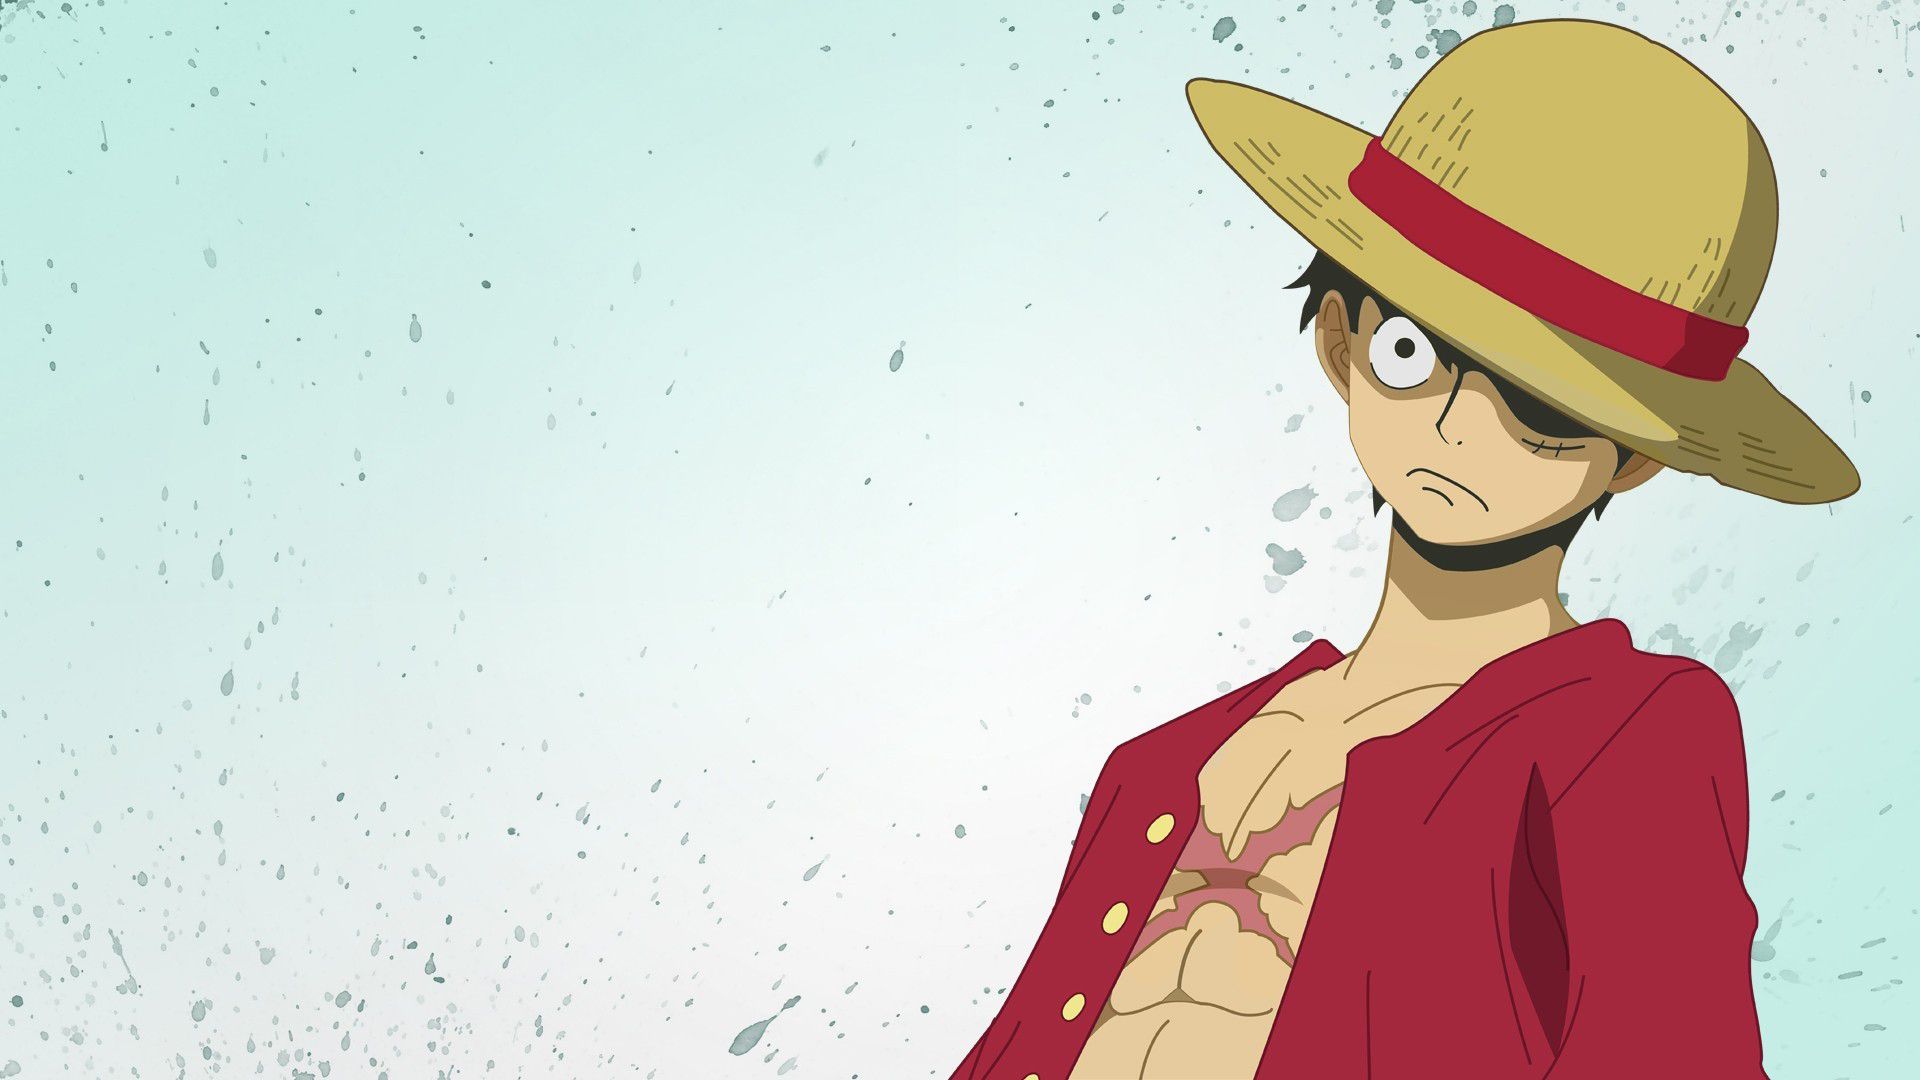 One-Piece-Anime-Wallpaper-Full-HD-Free-Download-PC-Macbook-Laptop-171121--36  -  - Free HD Wallpapers Download for Desktop Computer